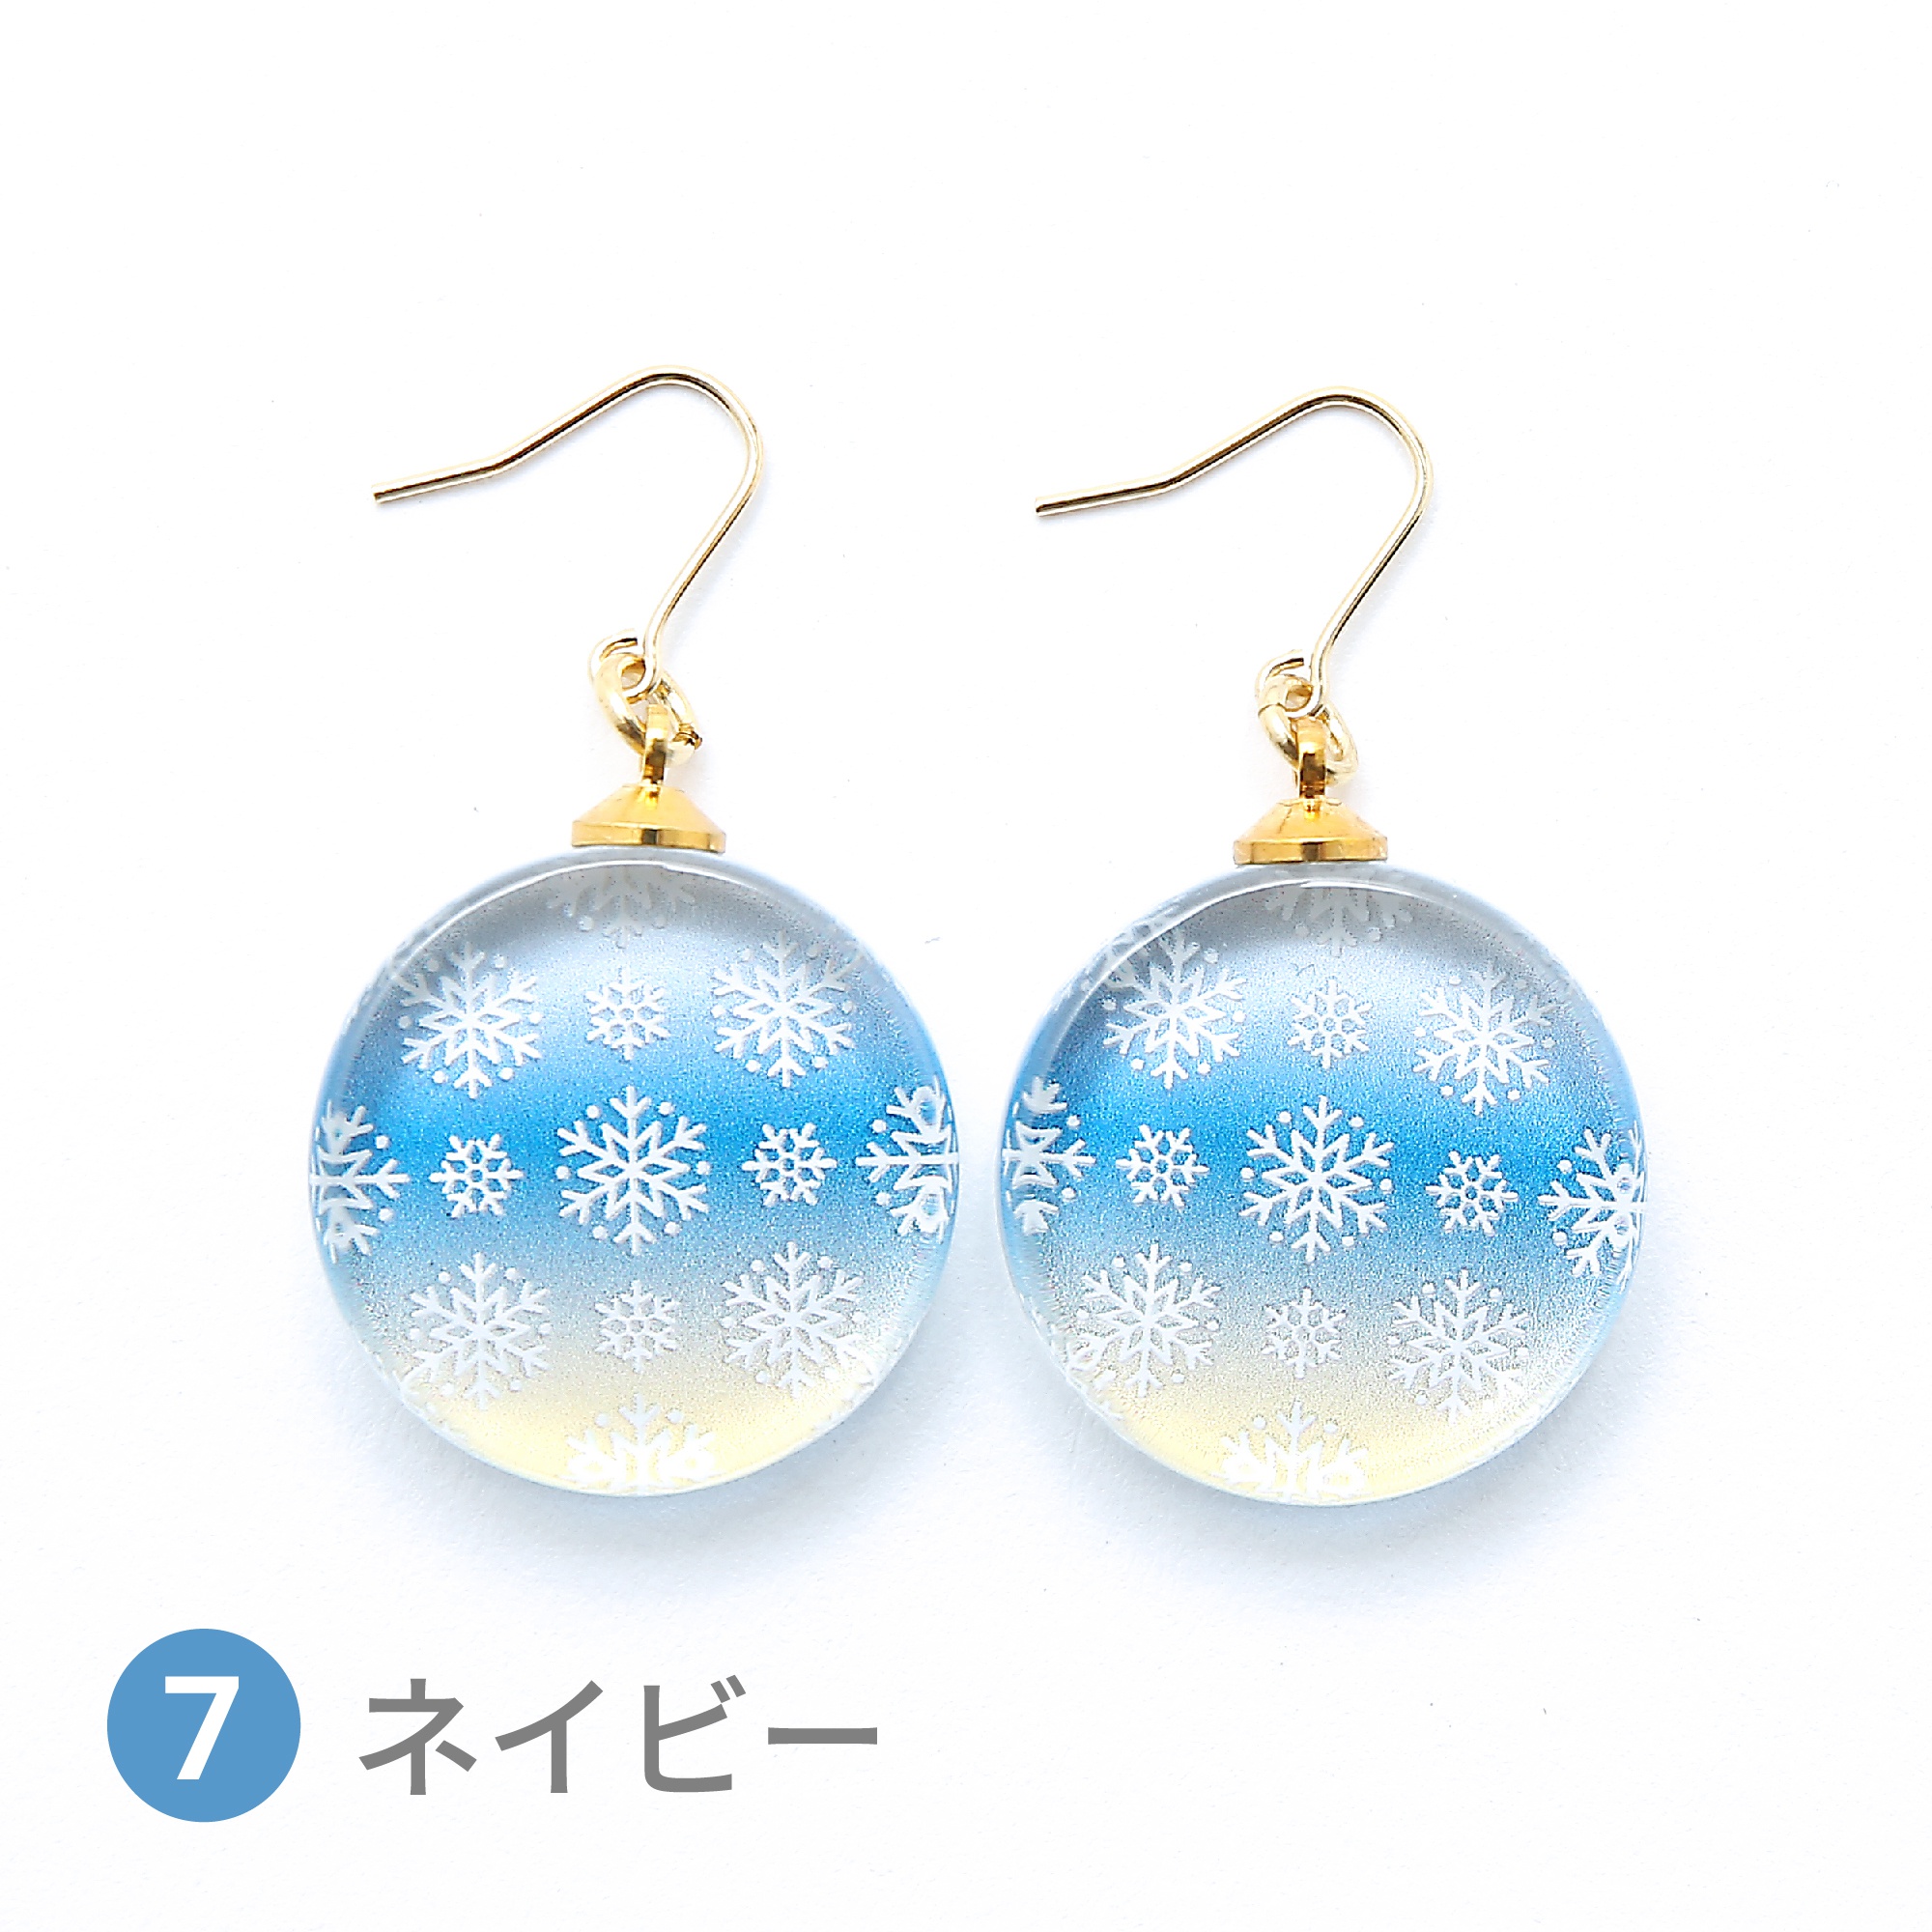 Glass accessories Pierced Earring snow flake navy round shape